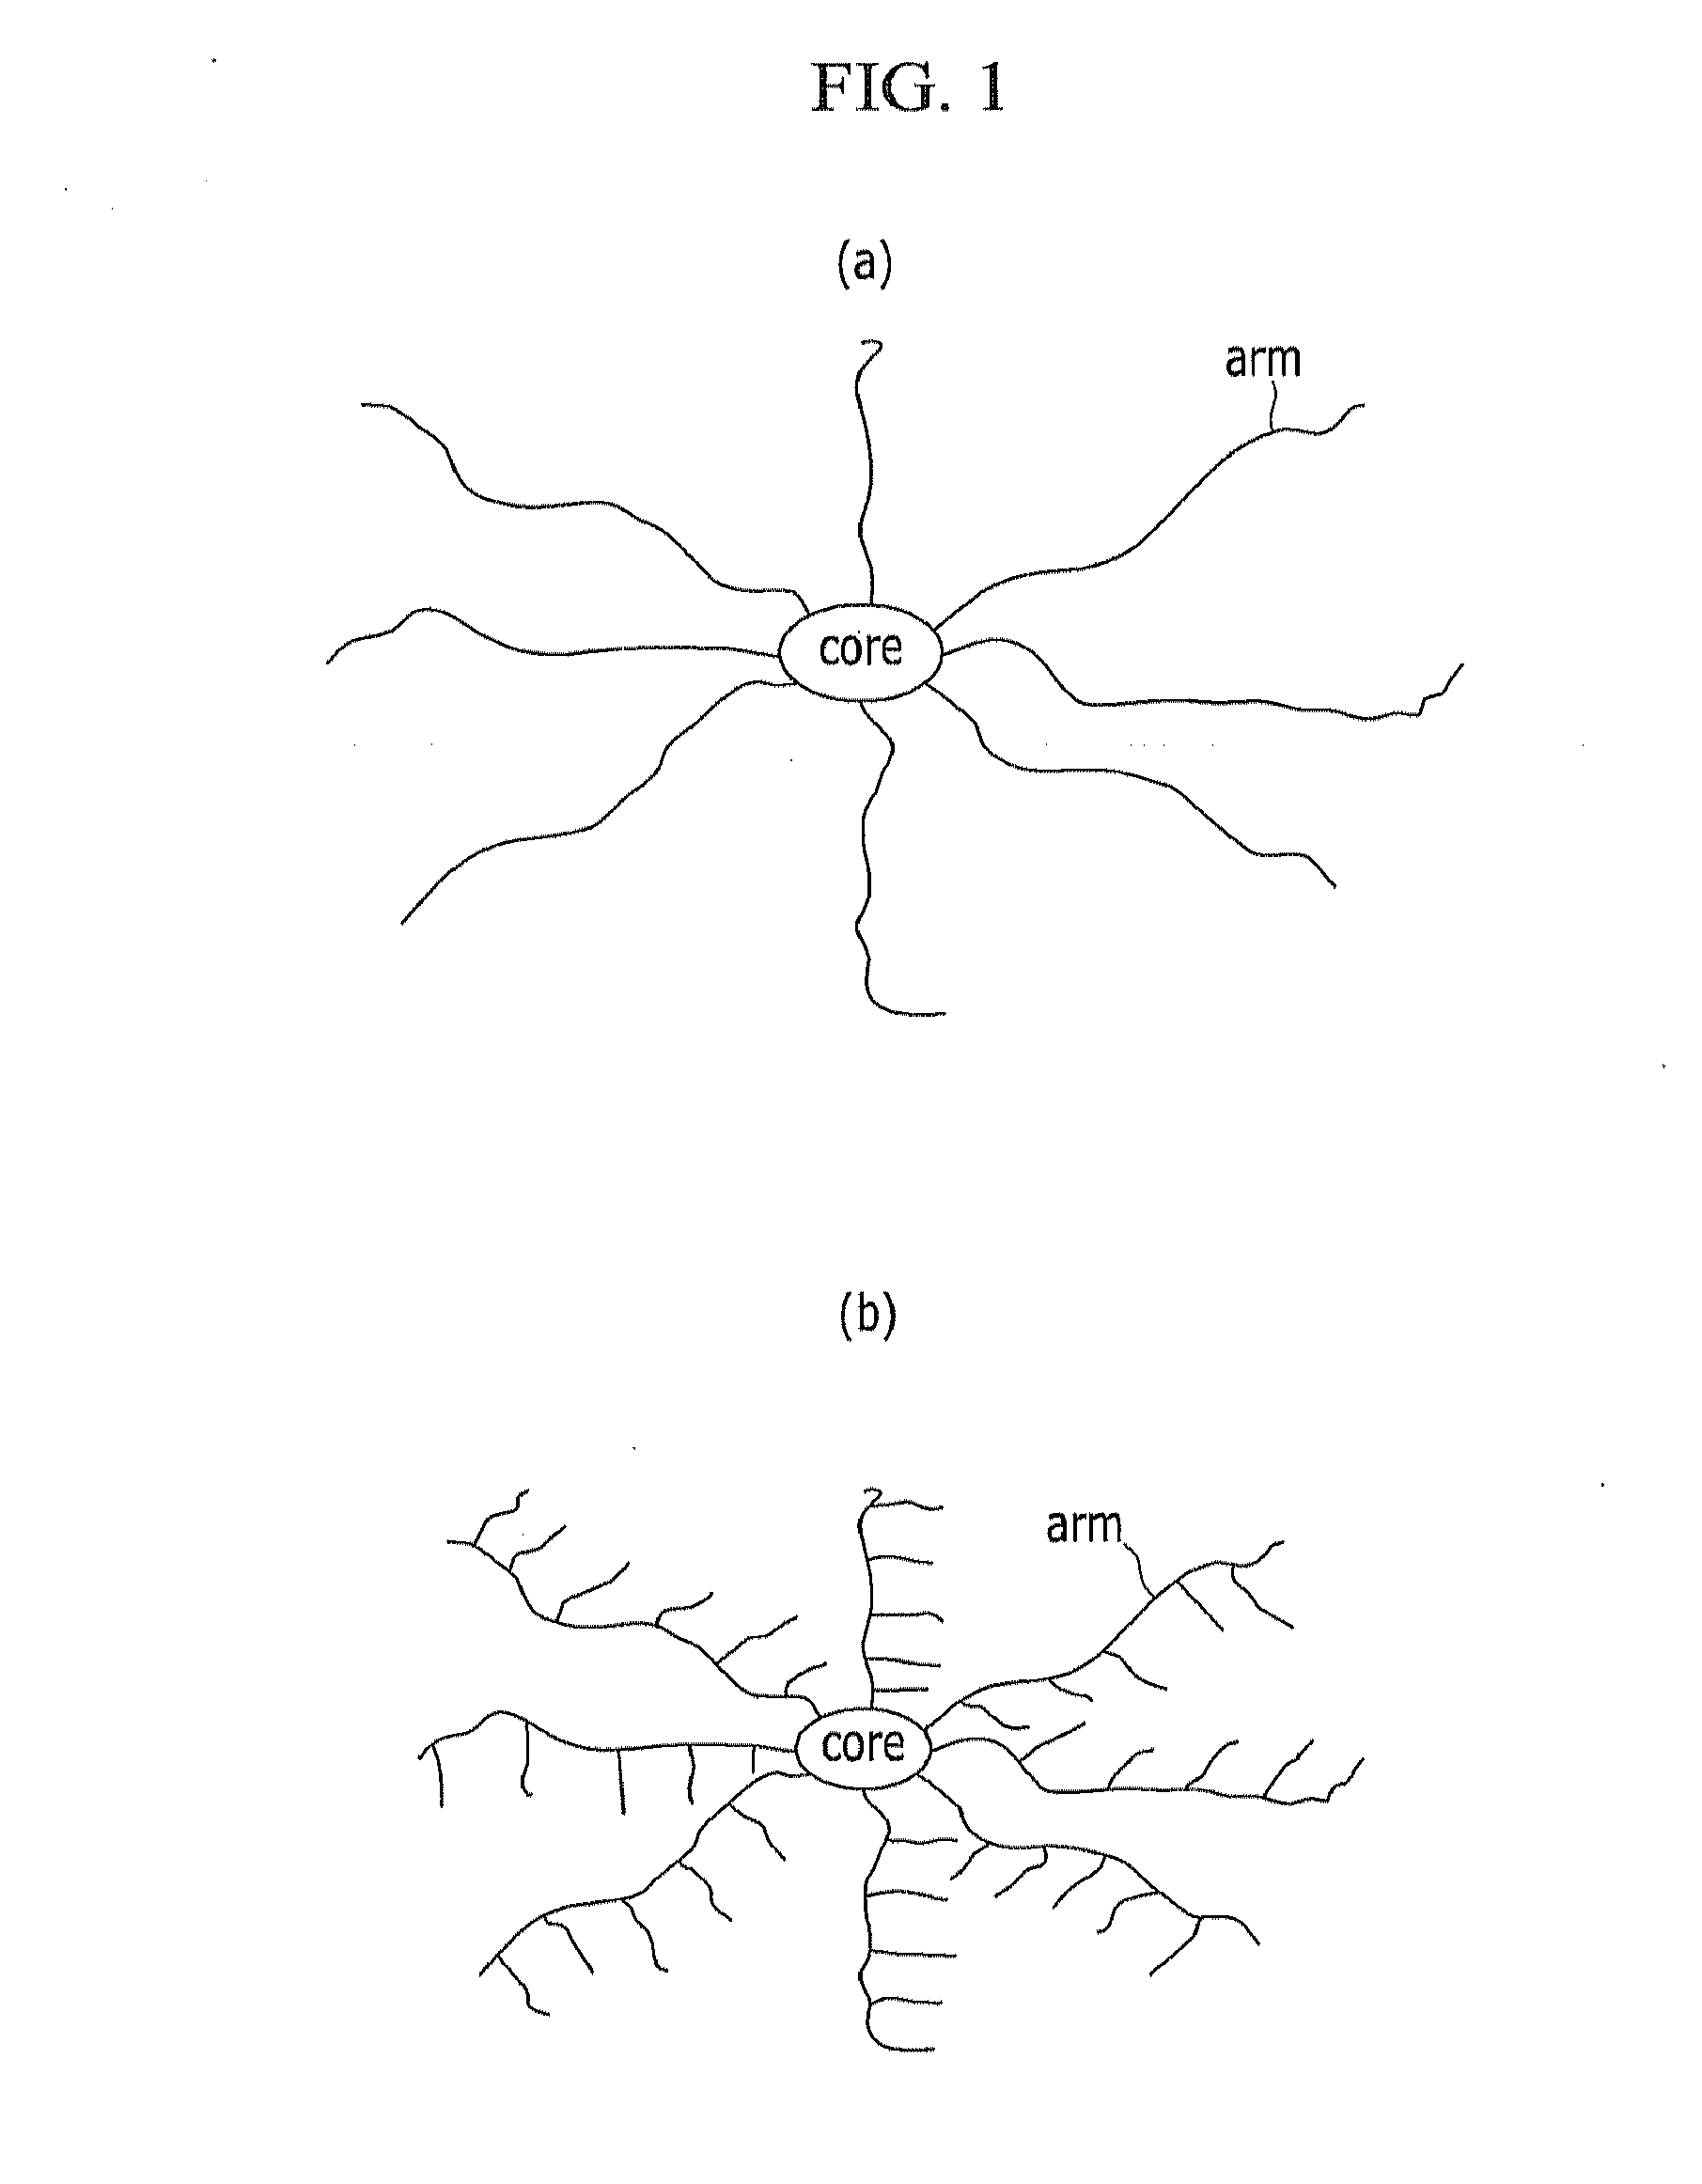 Organic/Inorganic Hybrid Compound For Fouling Resistance, Membrane Including The Same For Fouling Resistance, And Method Of Preparing Membrane For Fouling Resistance